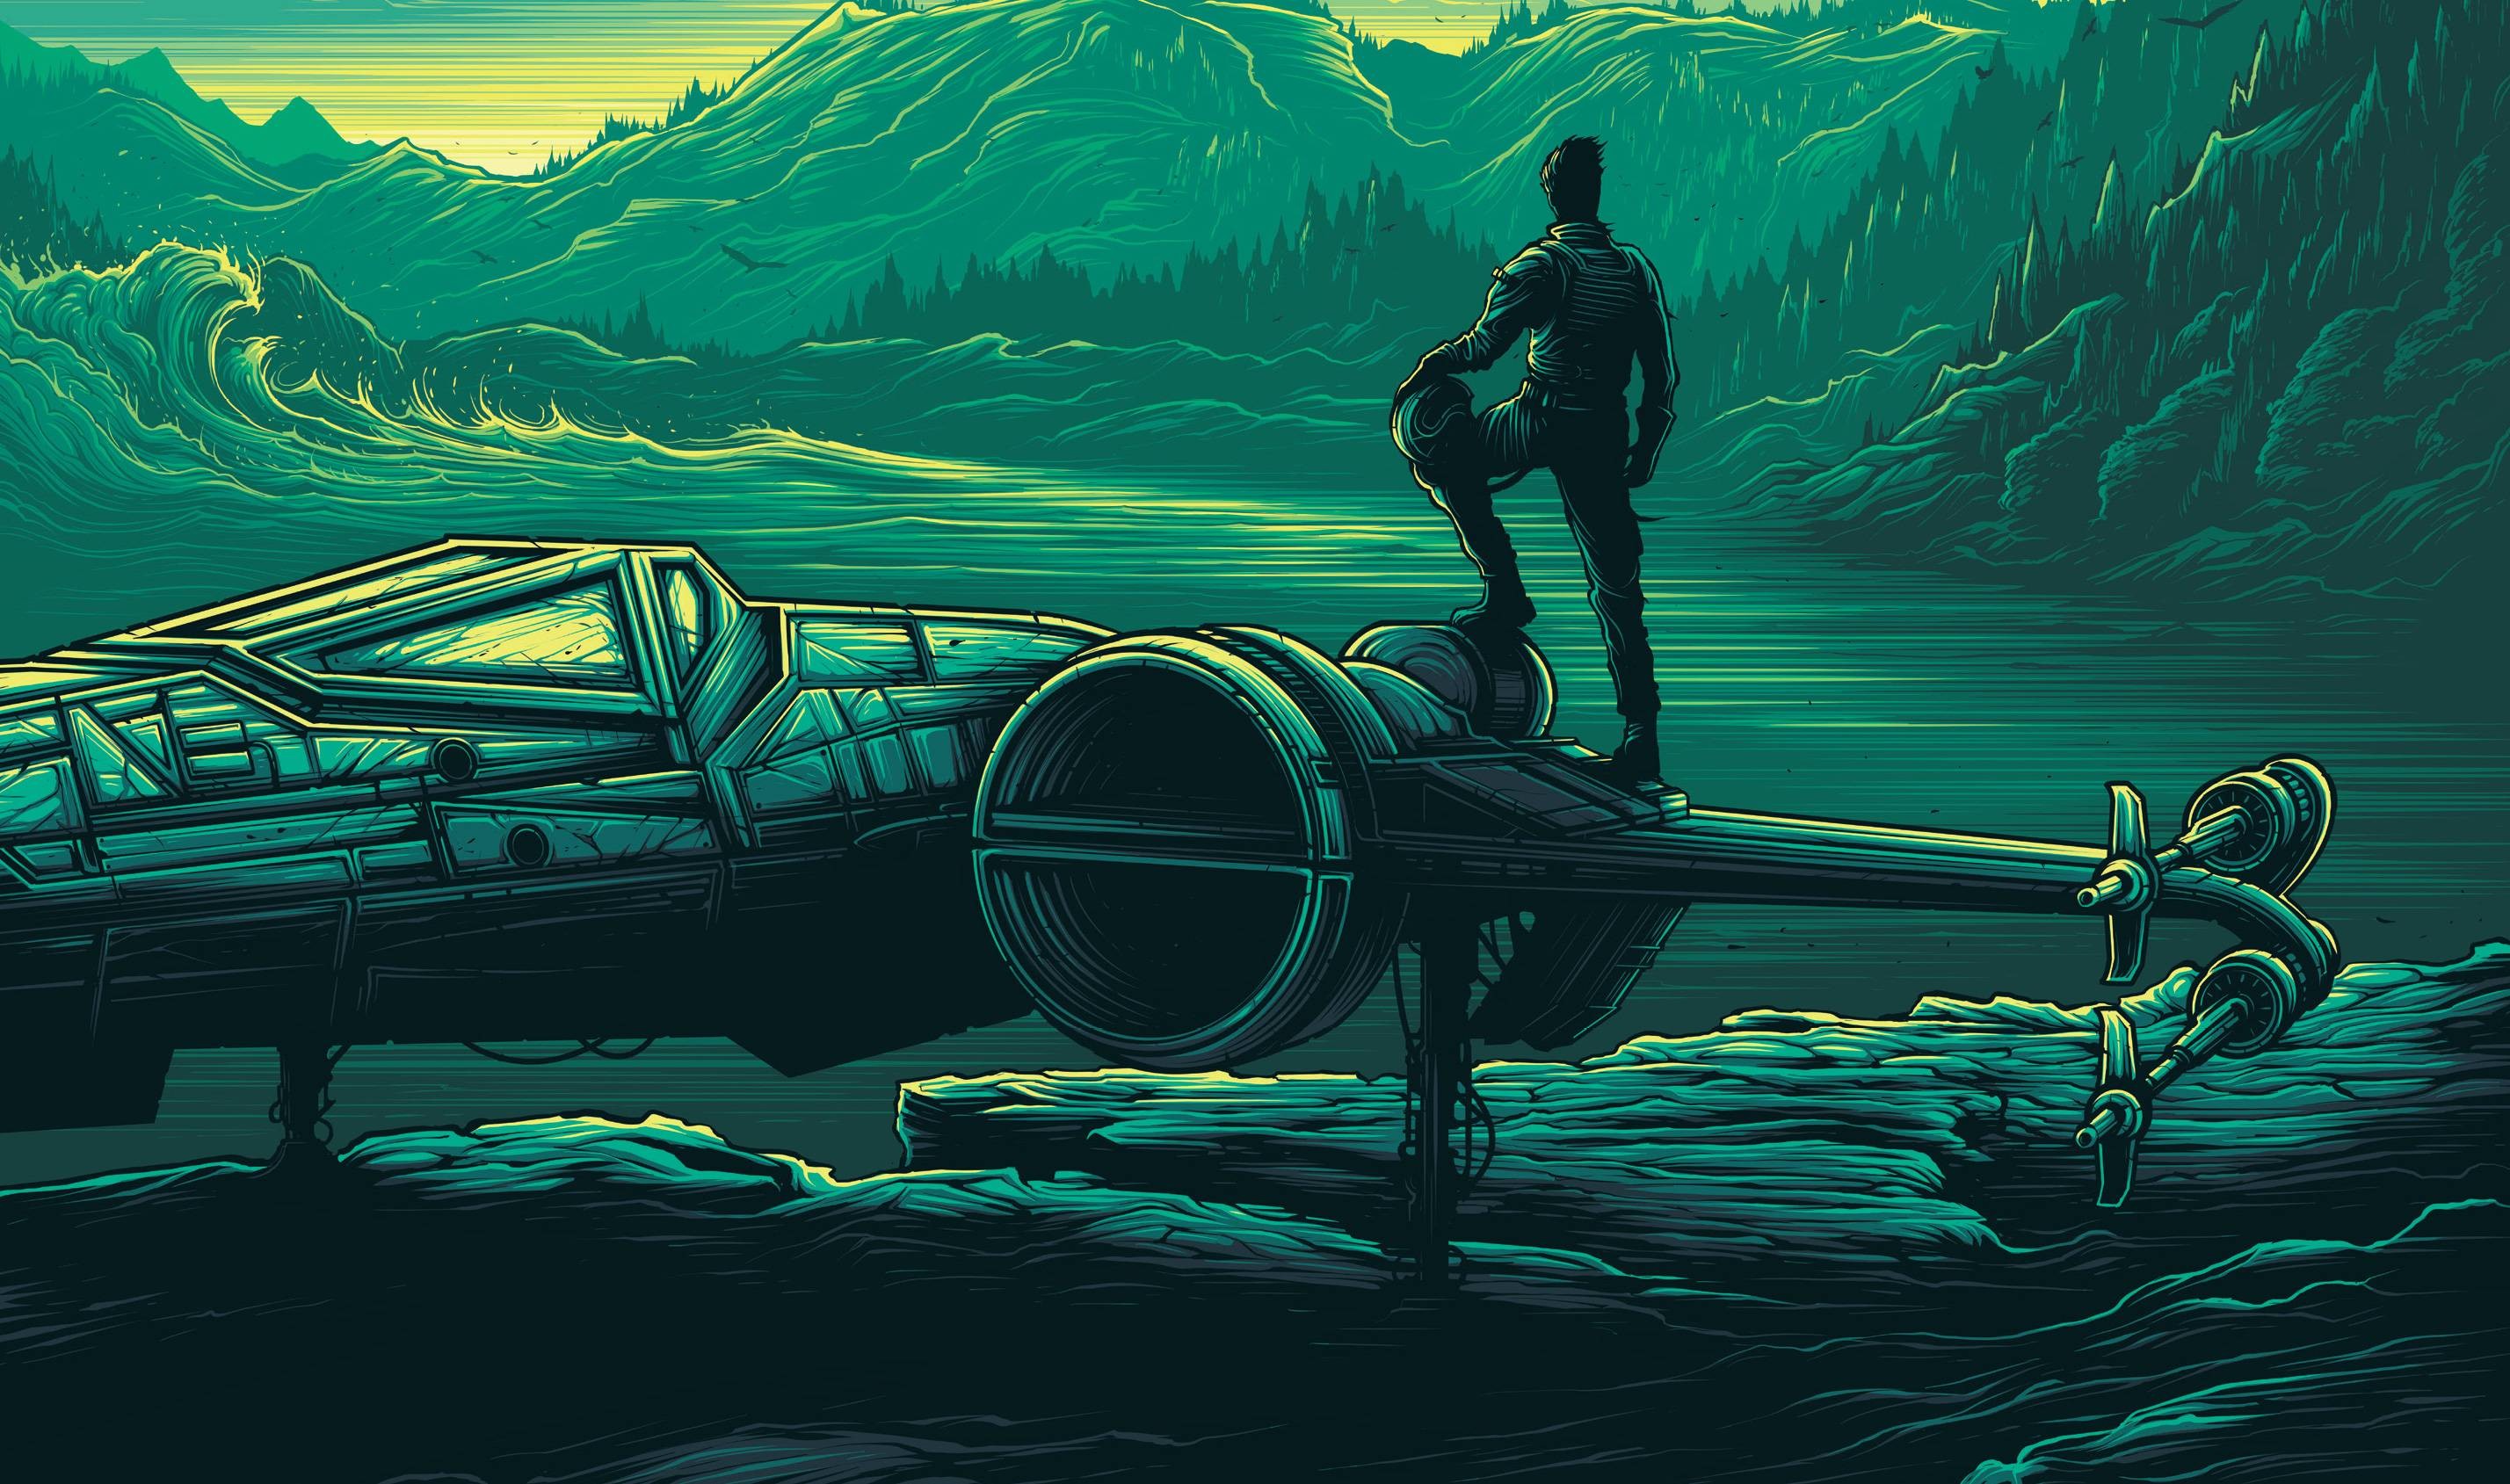 General 2856x1689 pastel Star Wars X-wing green pilot waves forest mountains Dan Mumford turquoise Star Wars Heroes vehicle Star Wars Ships standing science fiction artwork